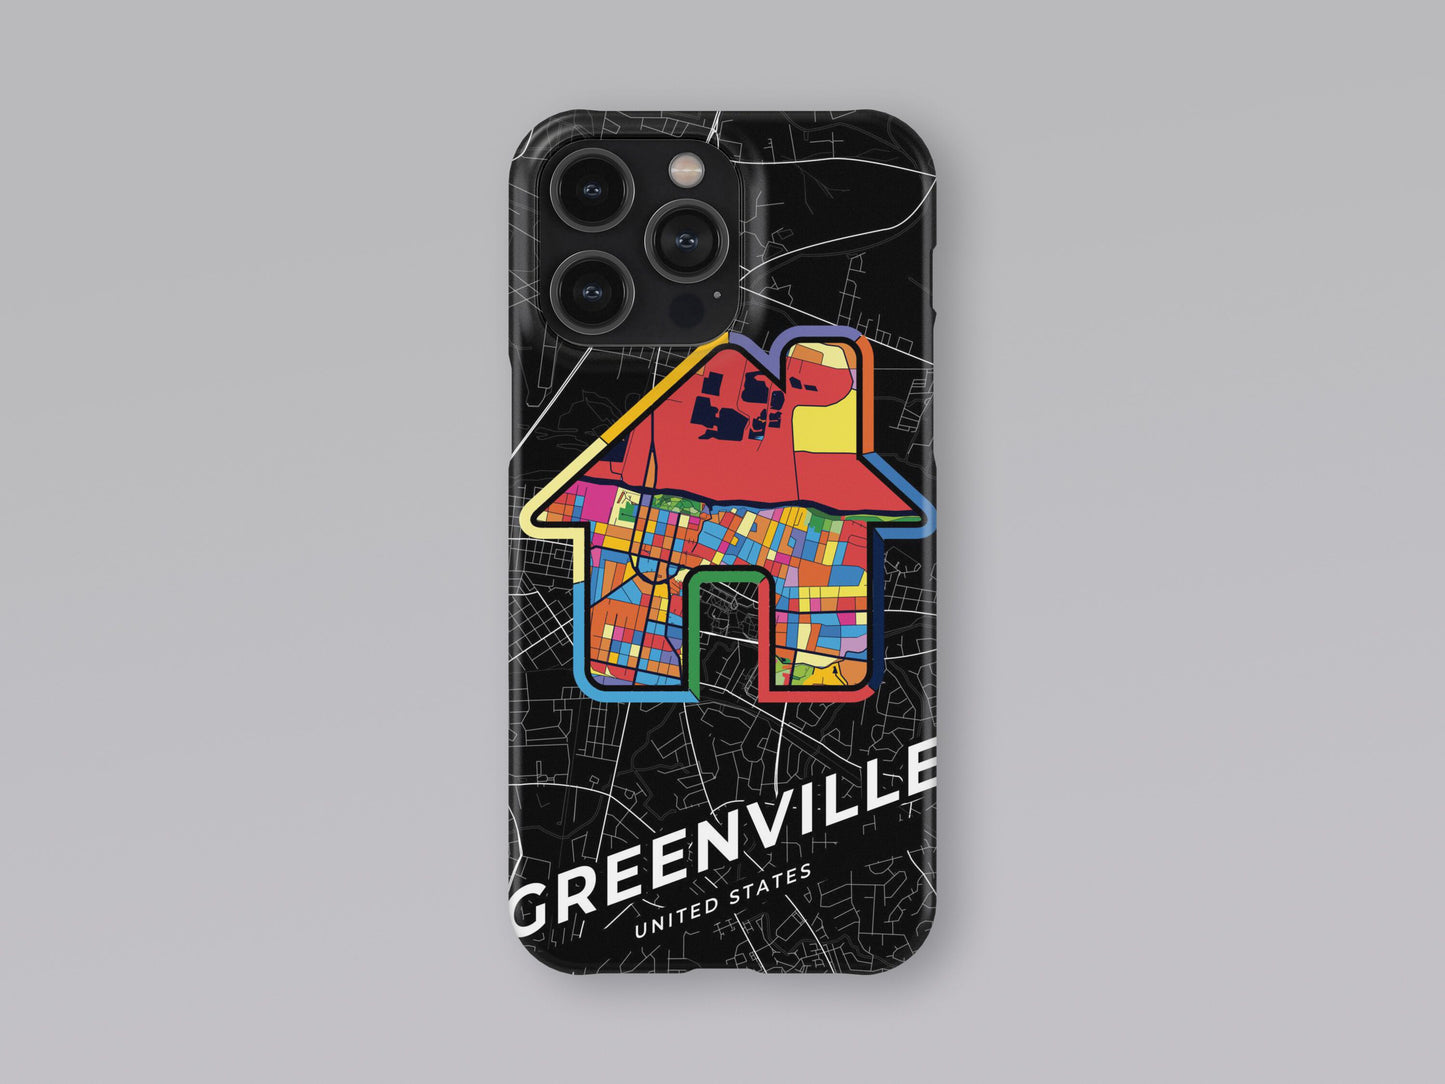 Greenville North Carolina slim phone case with colorful icon. Birthday, wedding or housewarming gift. Couple match cases. 3